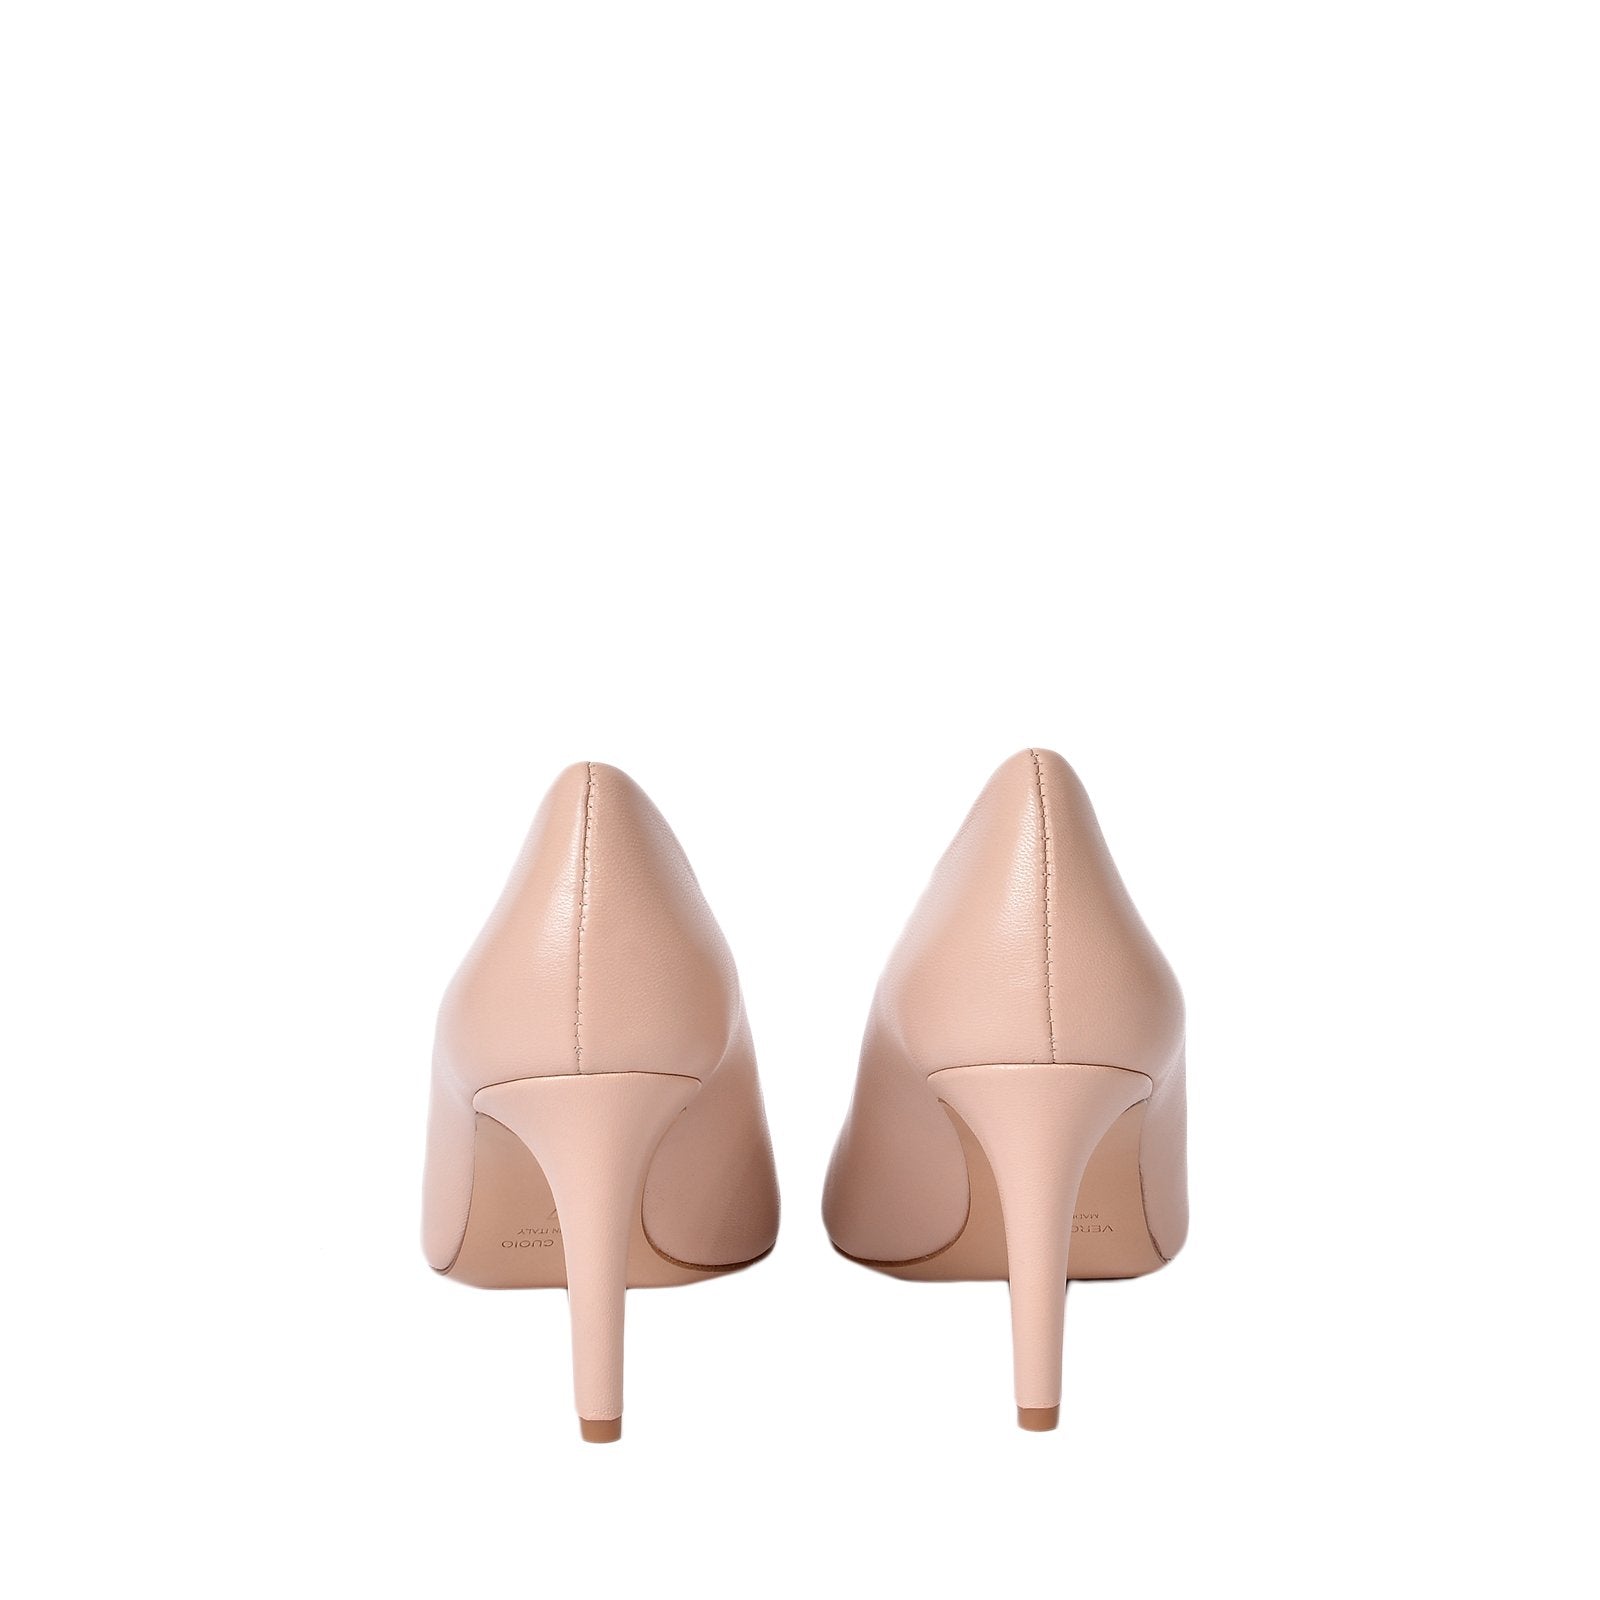 Rosa Nude Leather Pumps Heels 790-004-1 - 4